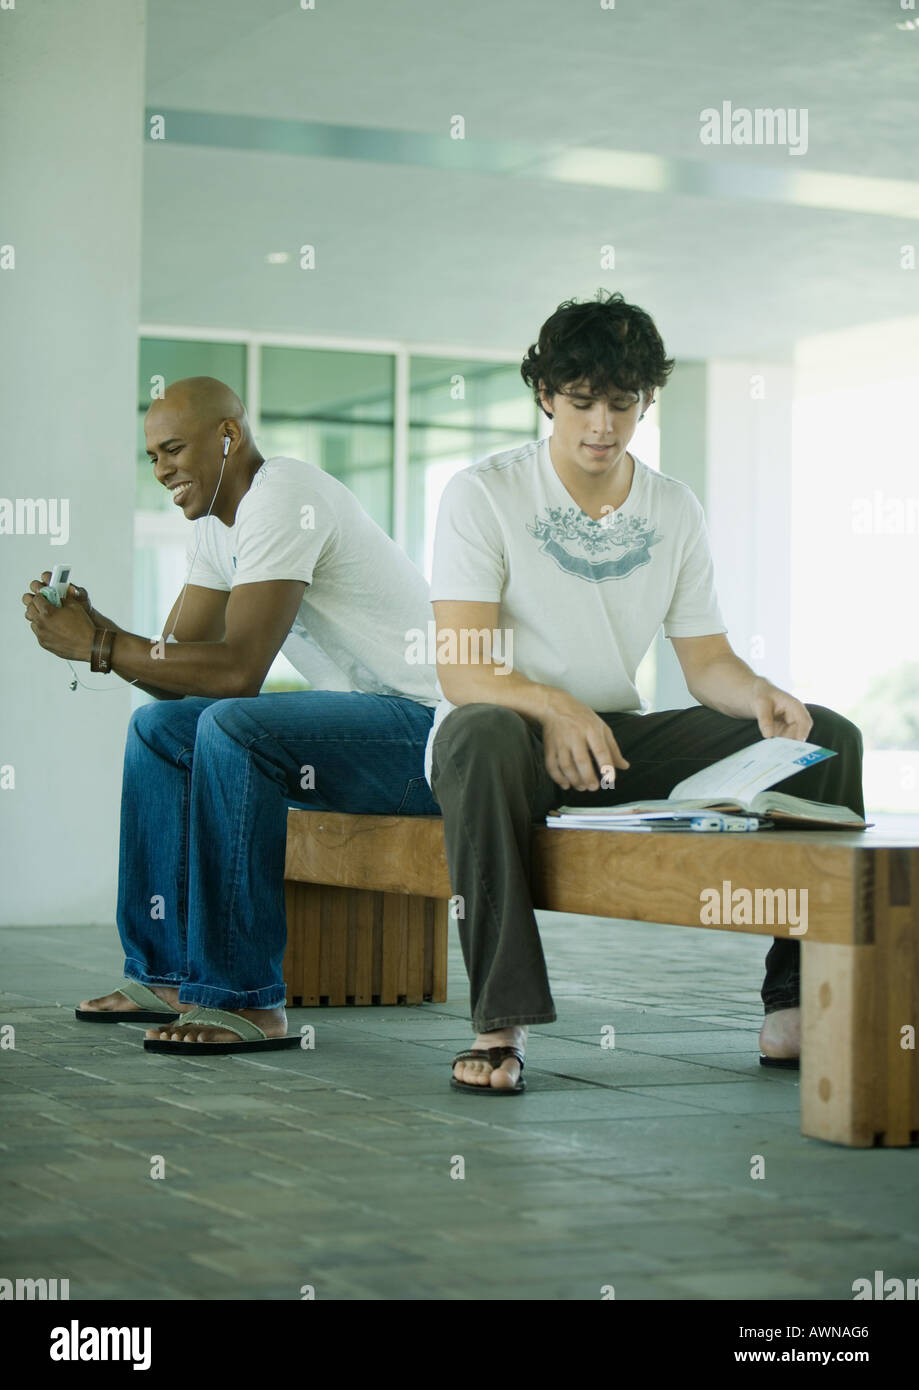 Male students sitting on bench on campus Stock Photo